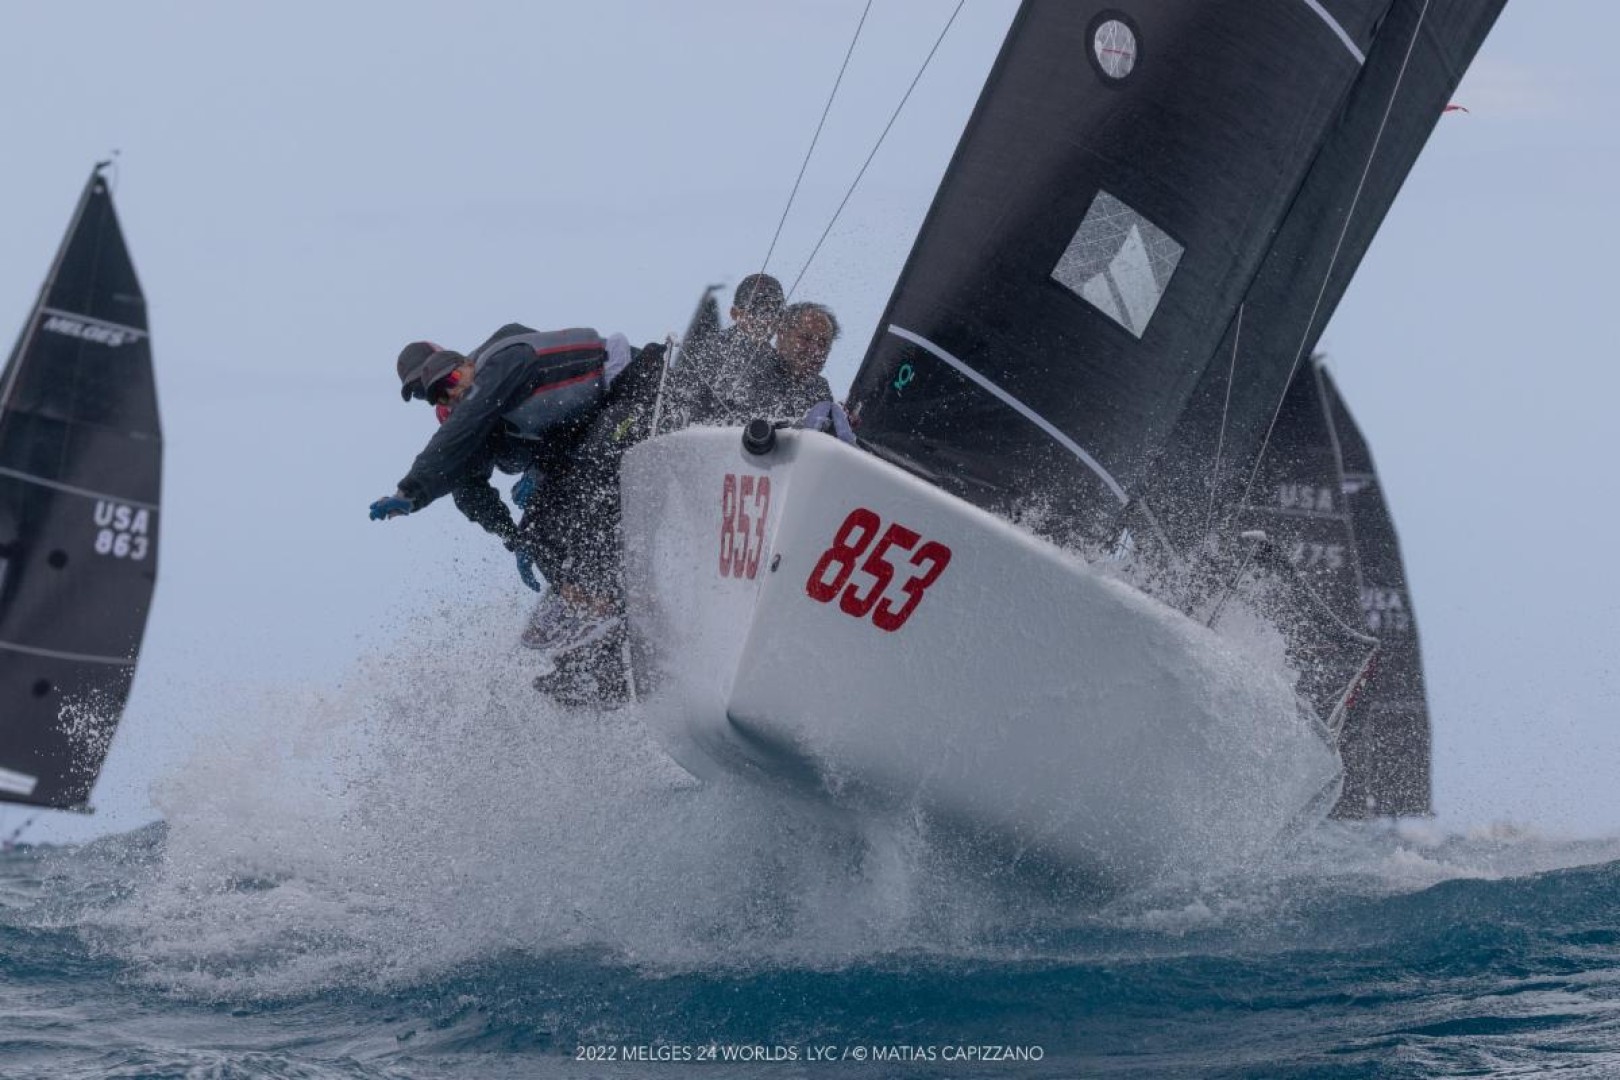 Richard Reid from Canada on Zingara (10-1-18) was victorious in the third race on Day Two at the Melges 24 Worlds 2022 © Matias Capizzano